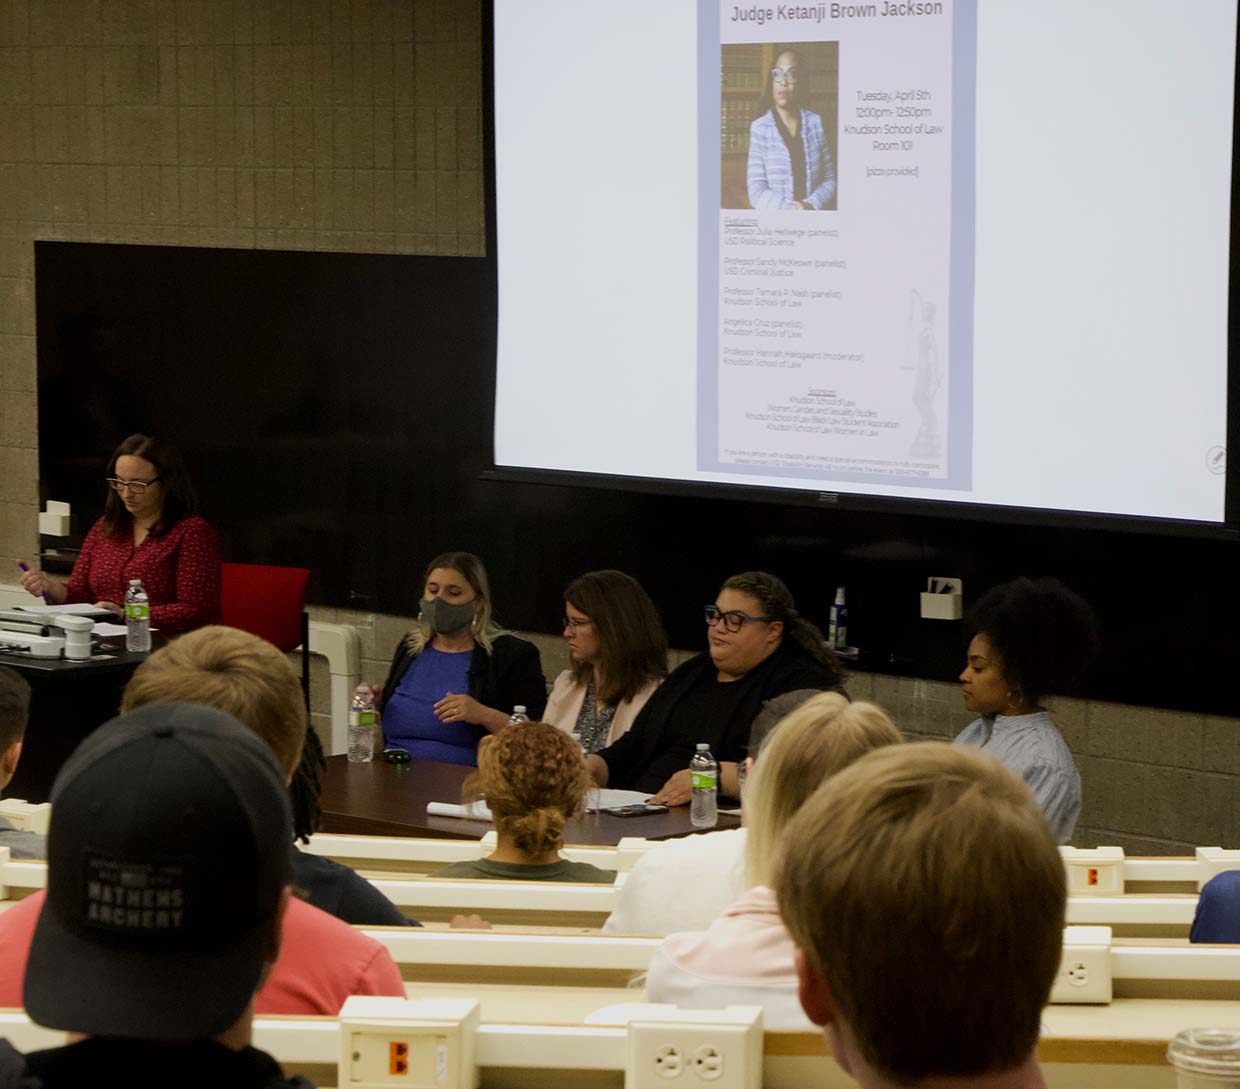 USD law school discusses historic moment for African American community